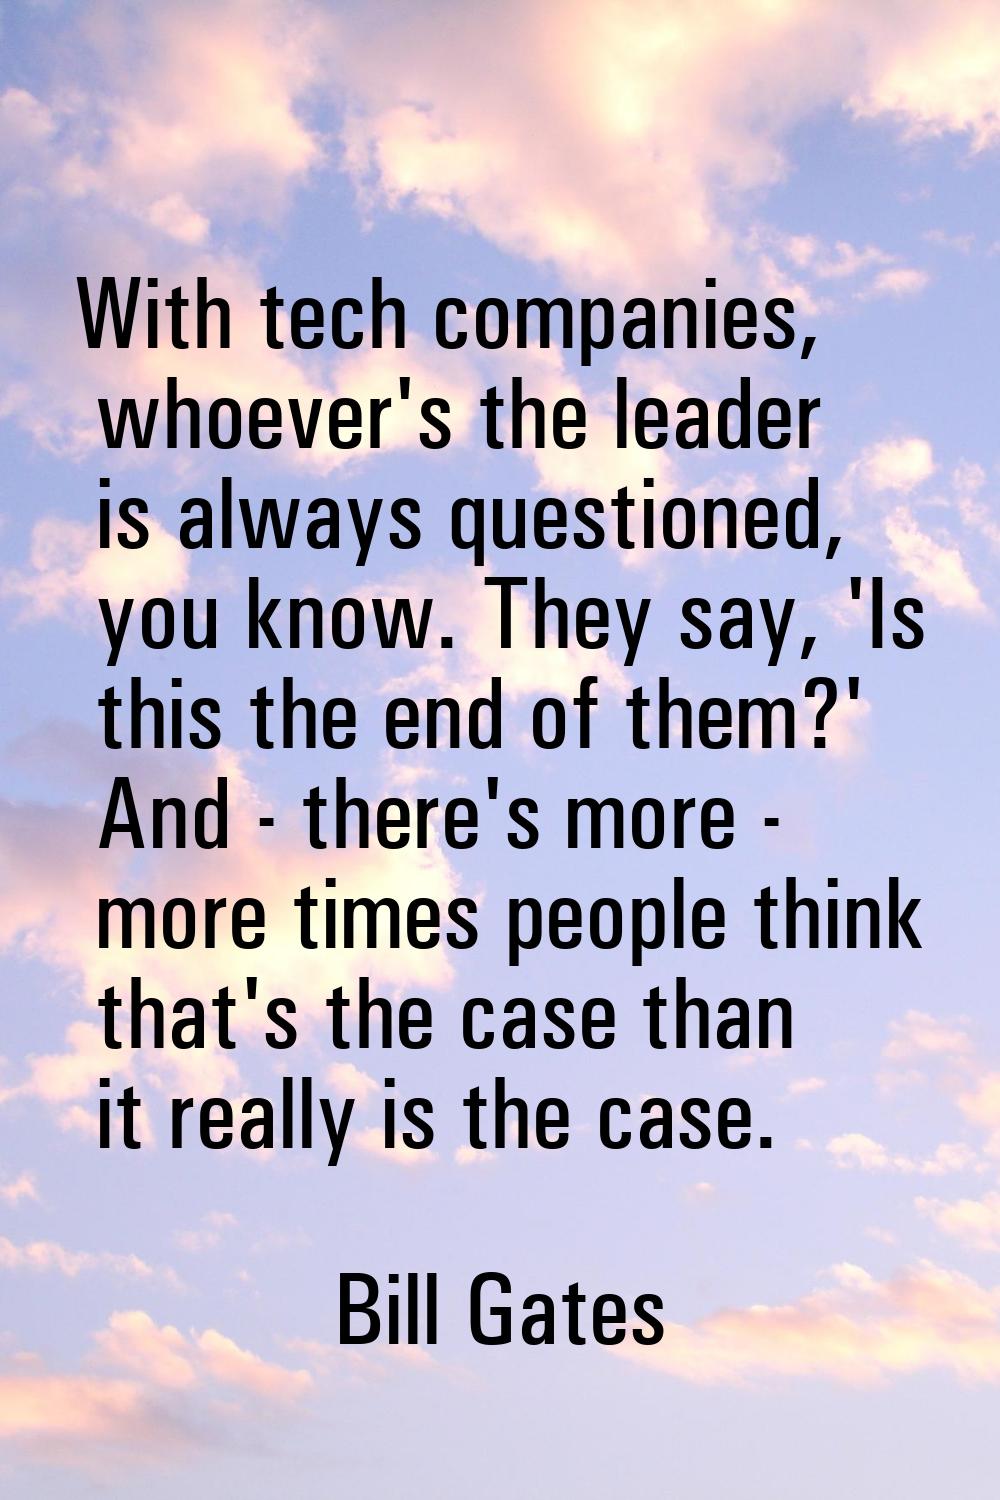 With tech companies, whoever's the leader is always questioned, you know. They say, 'Is this the en